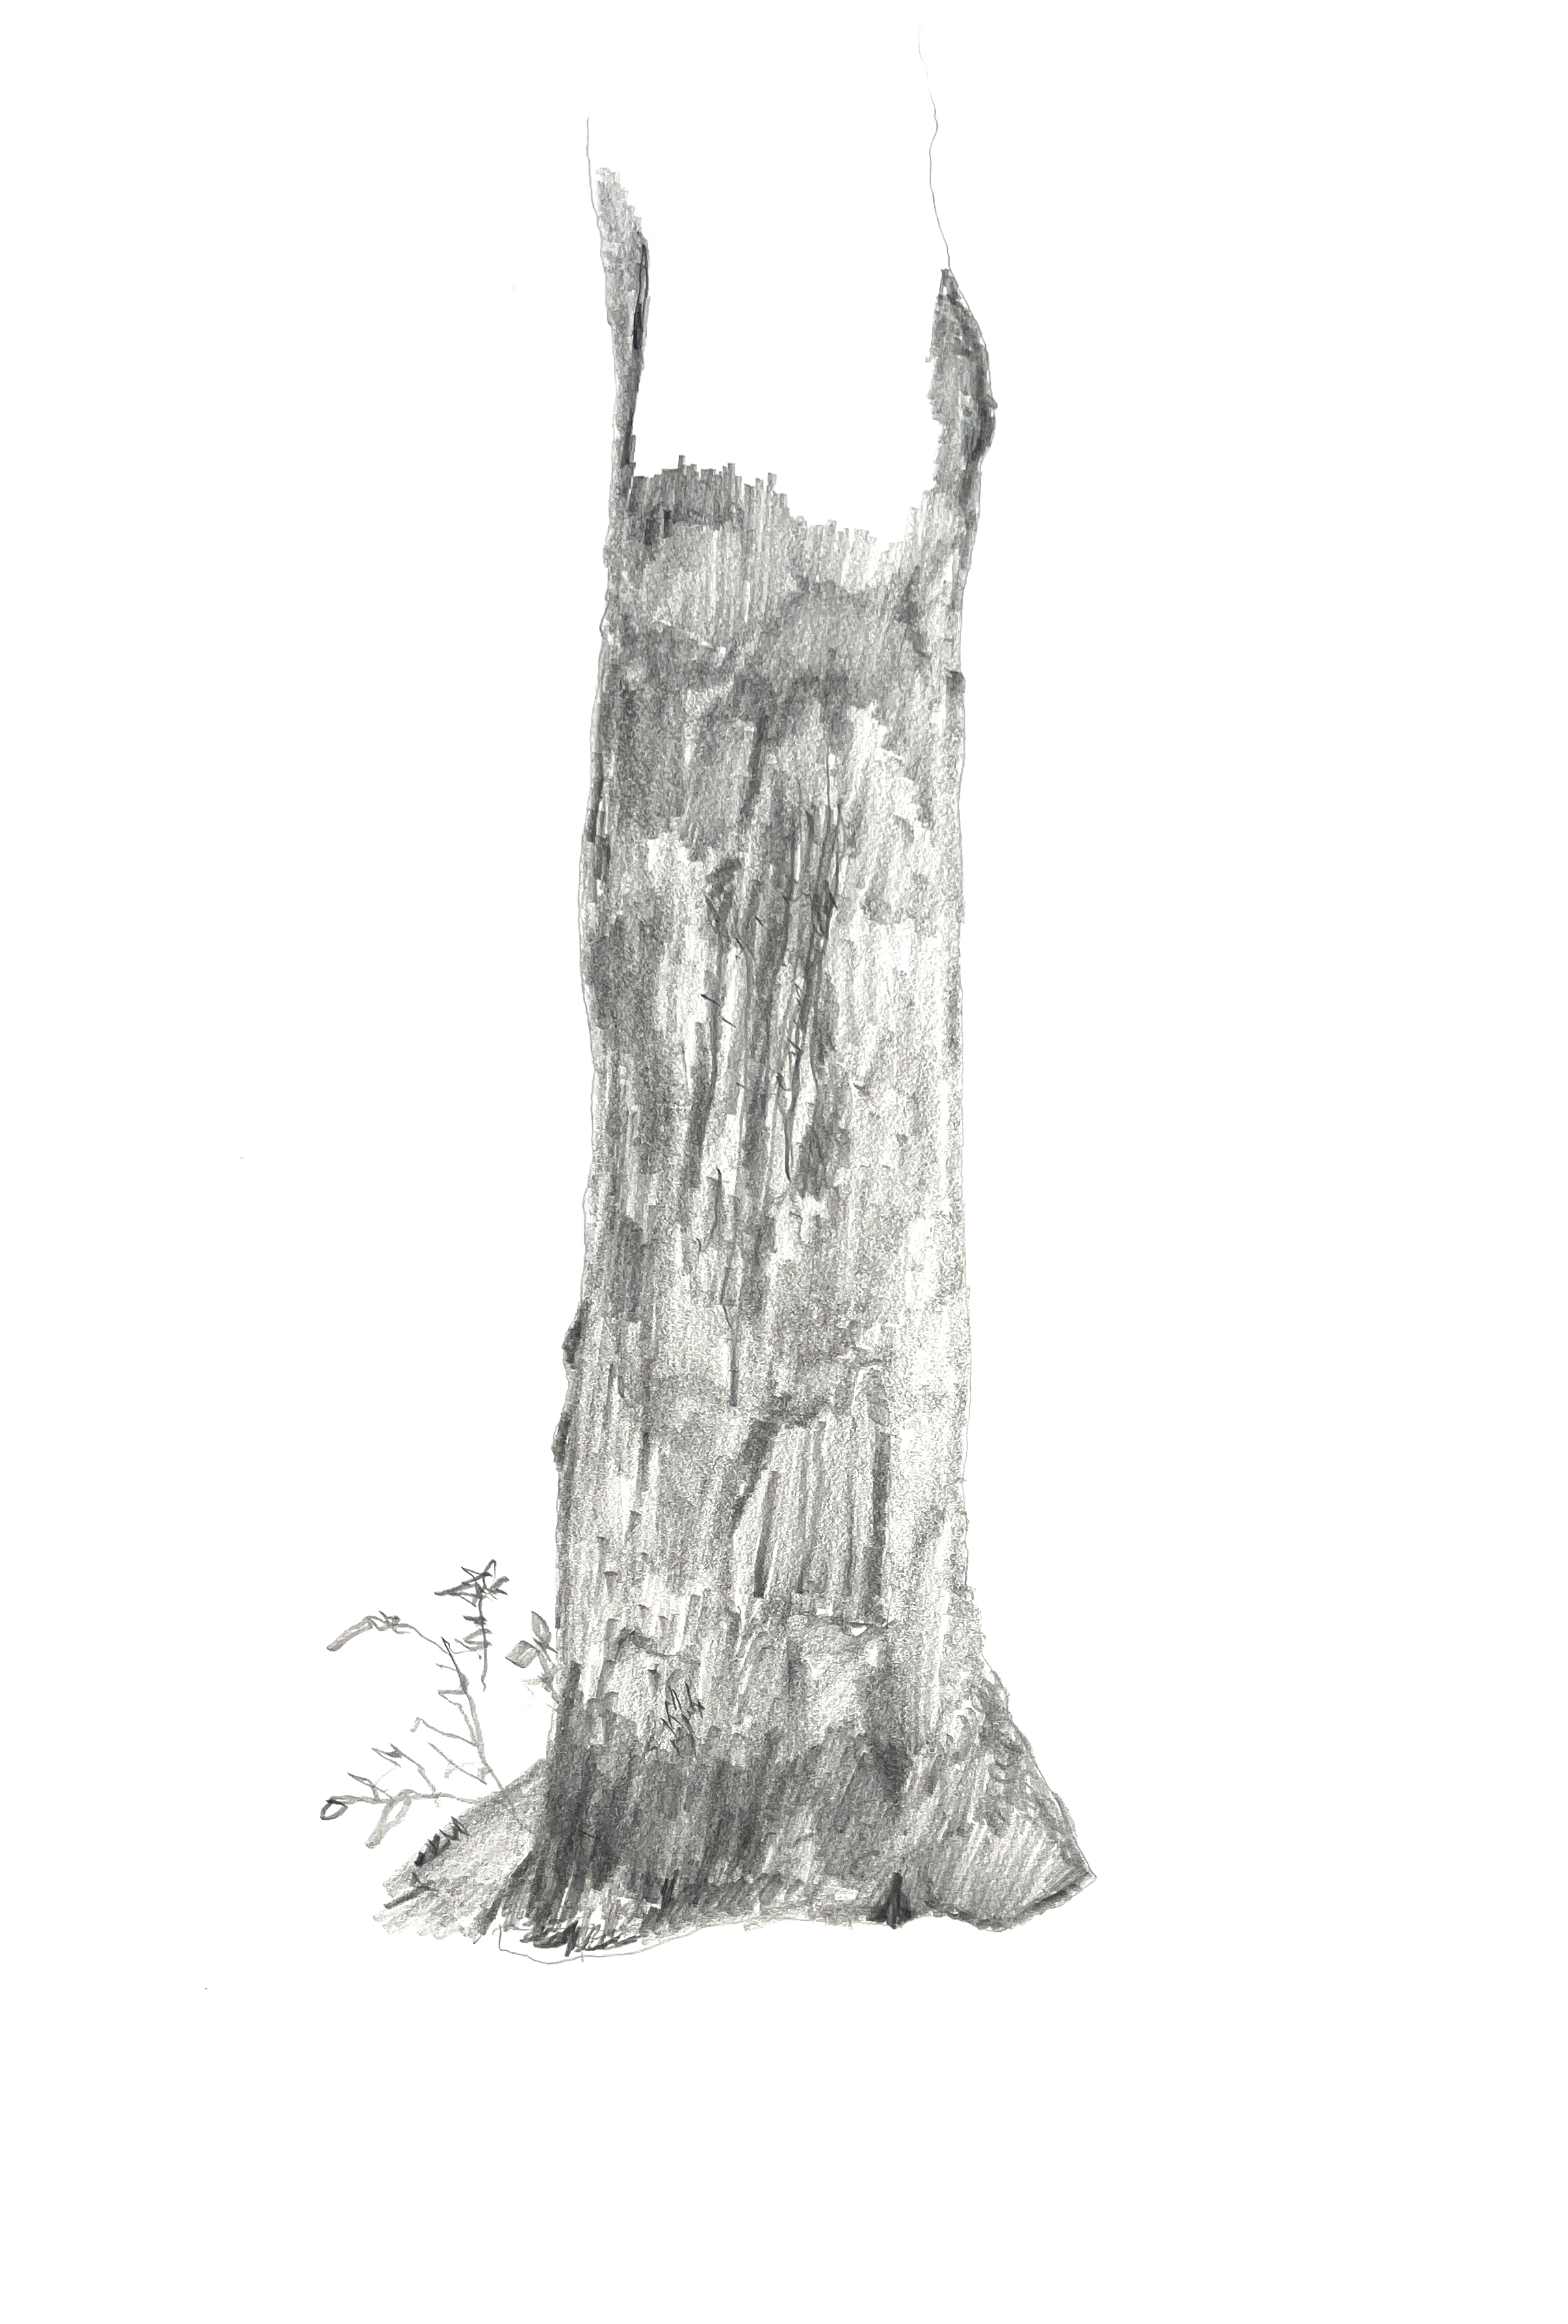 pencil drawing of a tree trunk, shaded in broad strokes